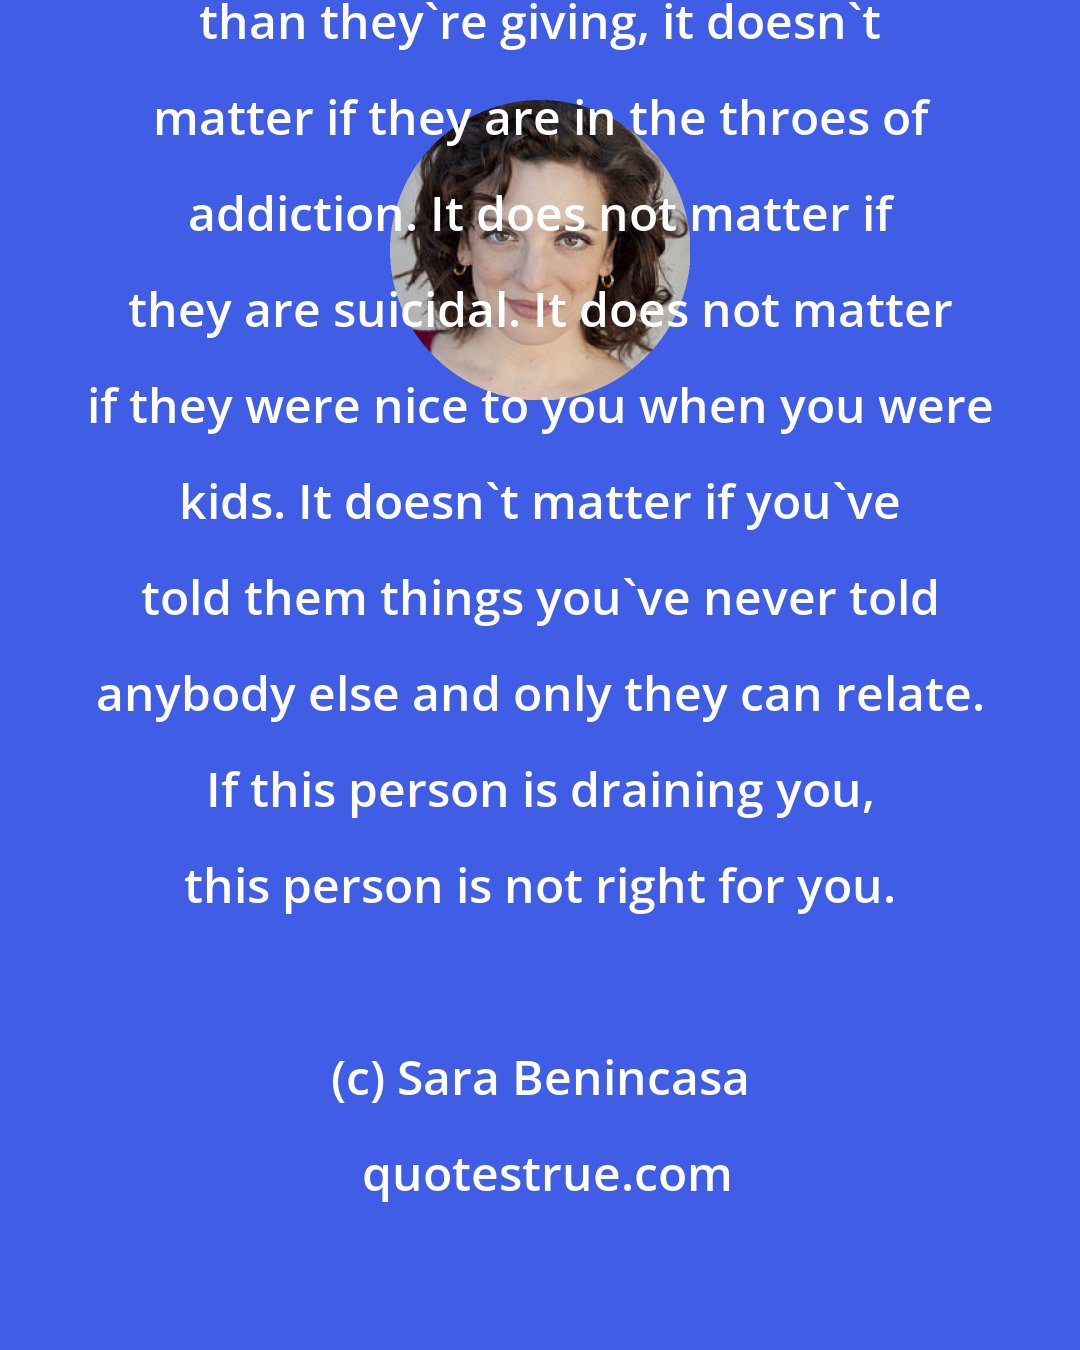 Sara Benincasa: If friends are taking more from you than they're giving, it doesn't matter if they are in the throes of addiction. It does not matter if they are suicidal. It does not matter if they were nice to you when you were kids. It doesn't matter if you've told them things you've never told anybody else and only they can relate. If this person is draining you, this person is not right for you.